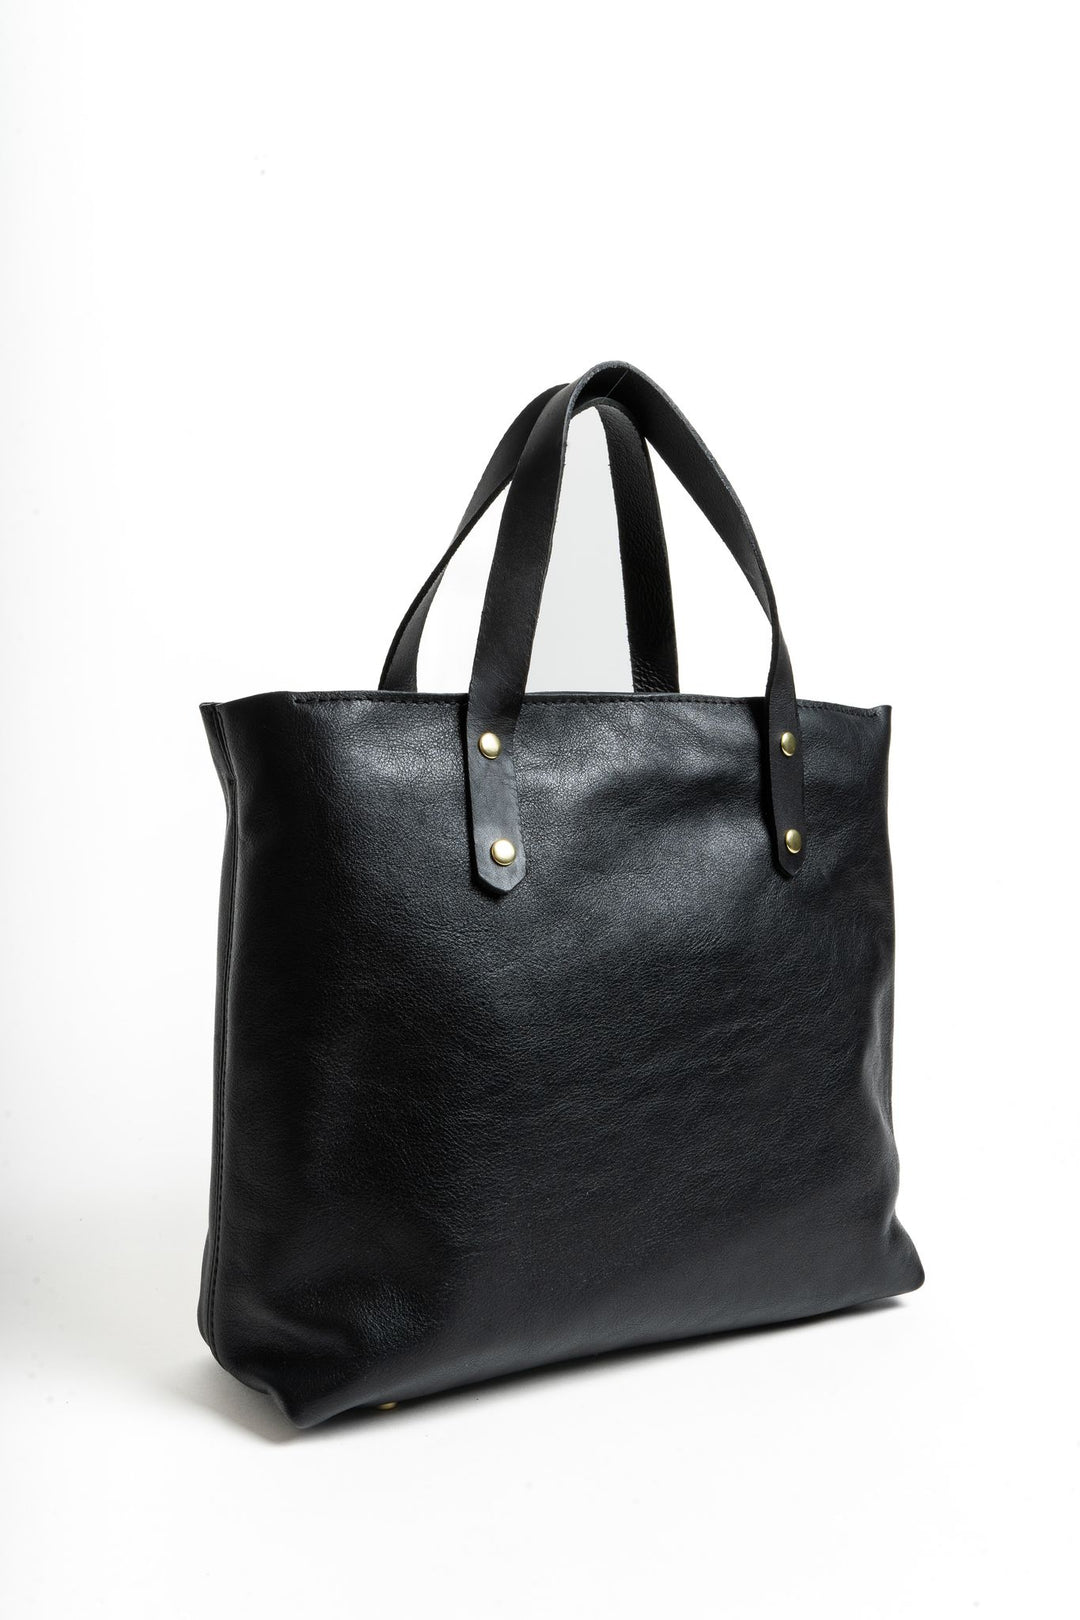 Extra LARGE Leather TOTE Bag With Pockets and ZIPPER / Black -  Sweden